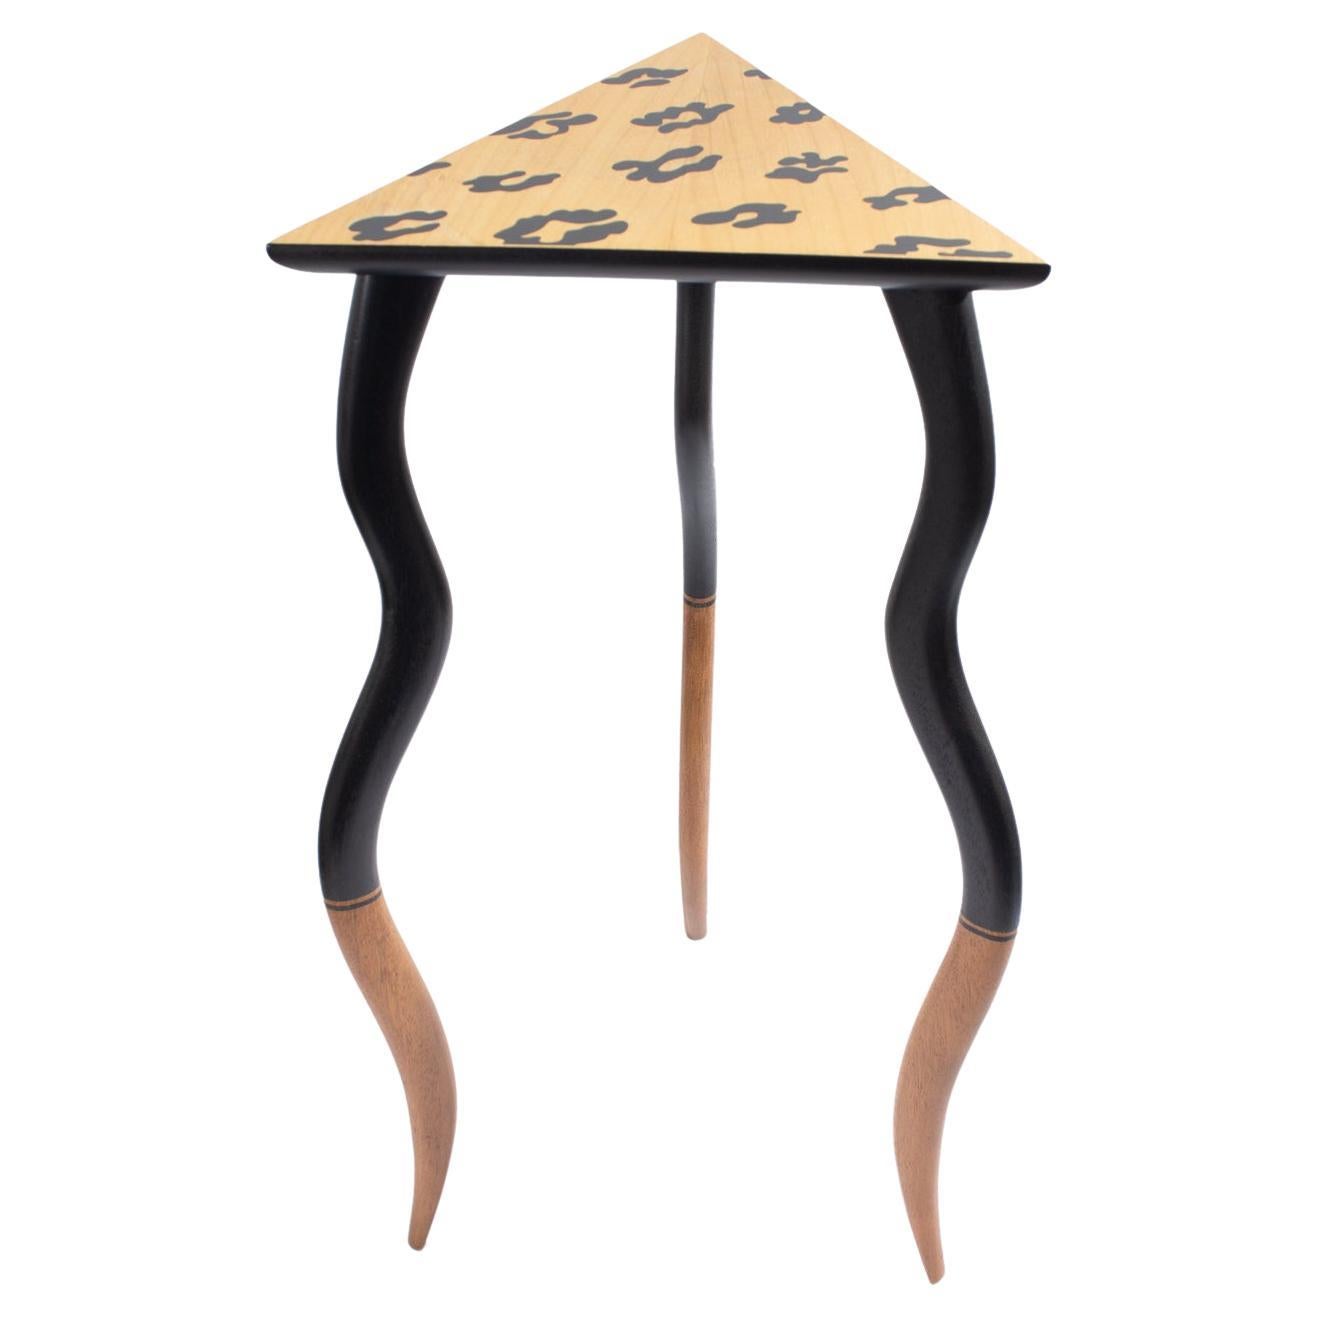 Bob Trotman "Dancing Table" Postmodern Wooden Accent Table For Sale